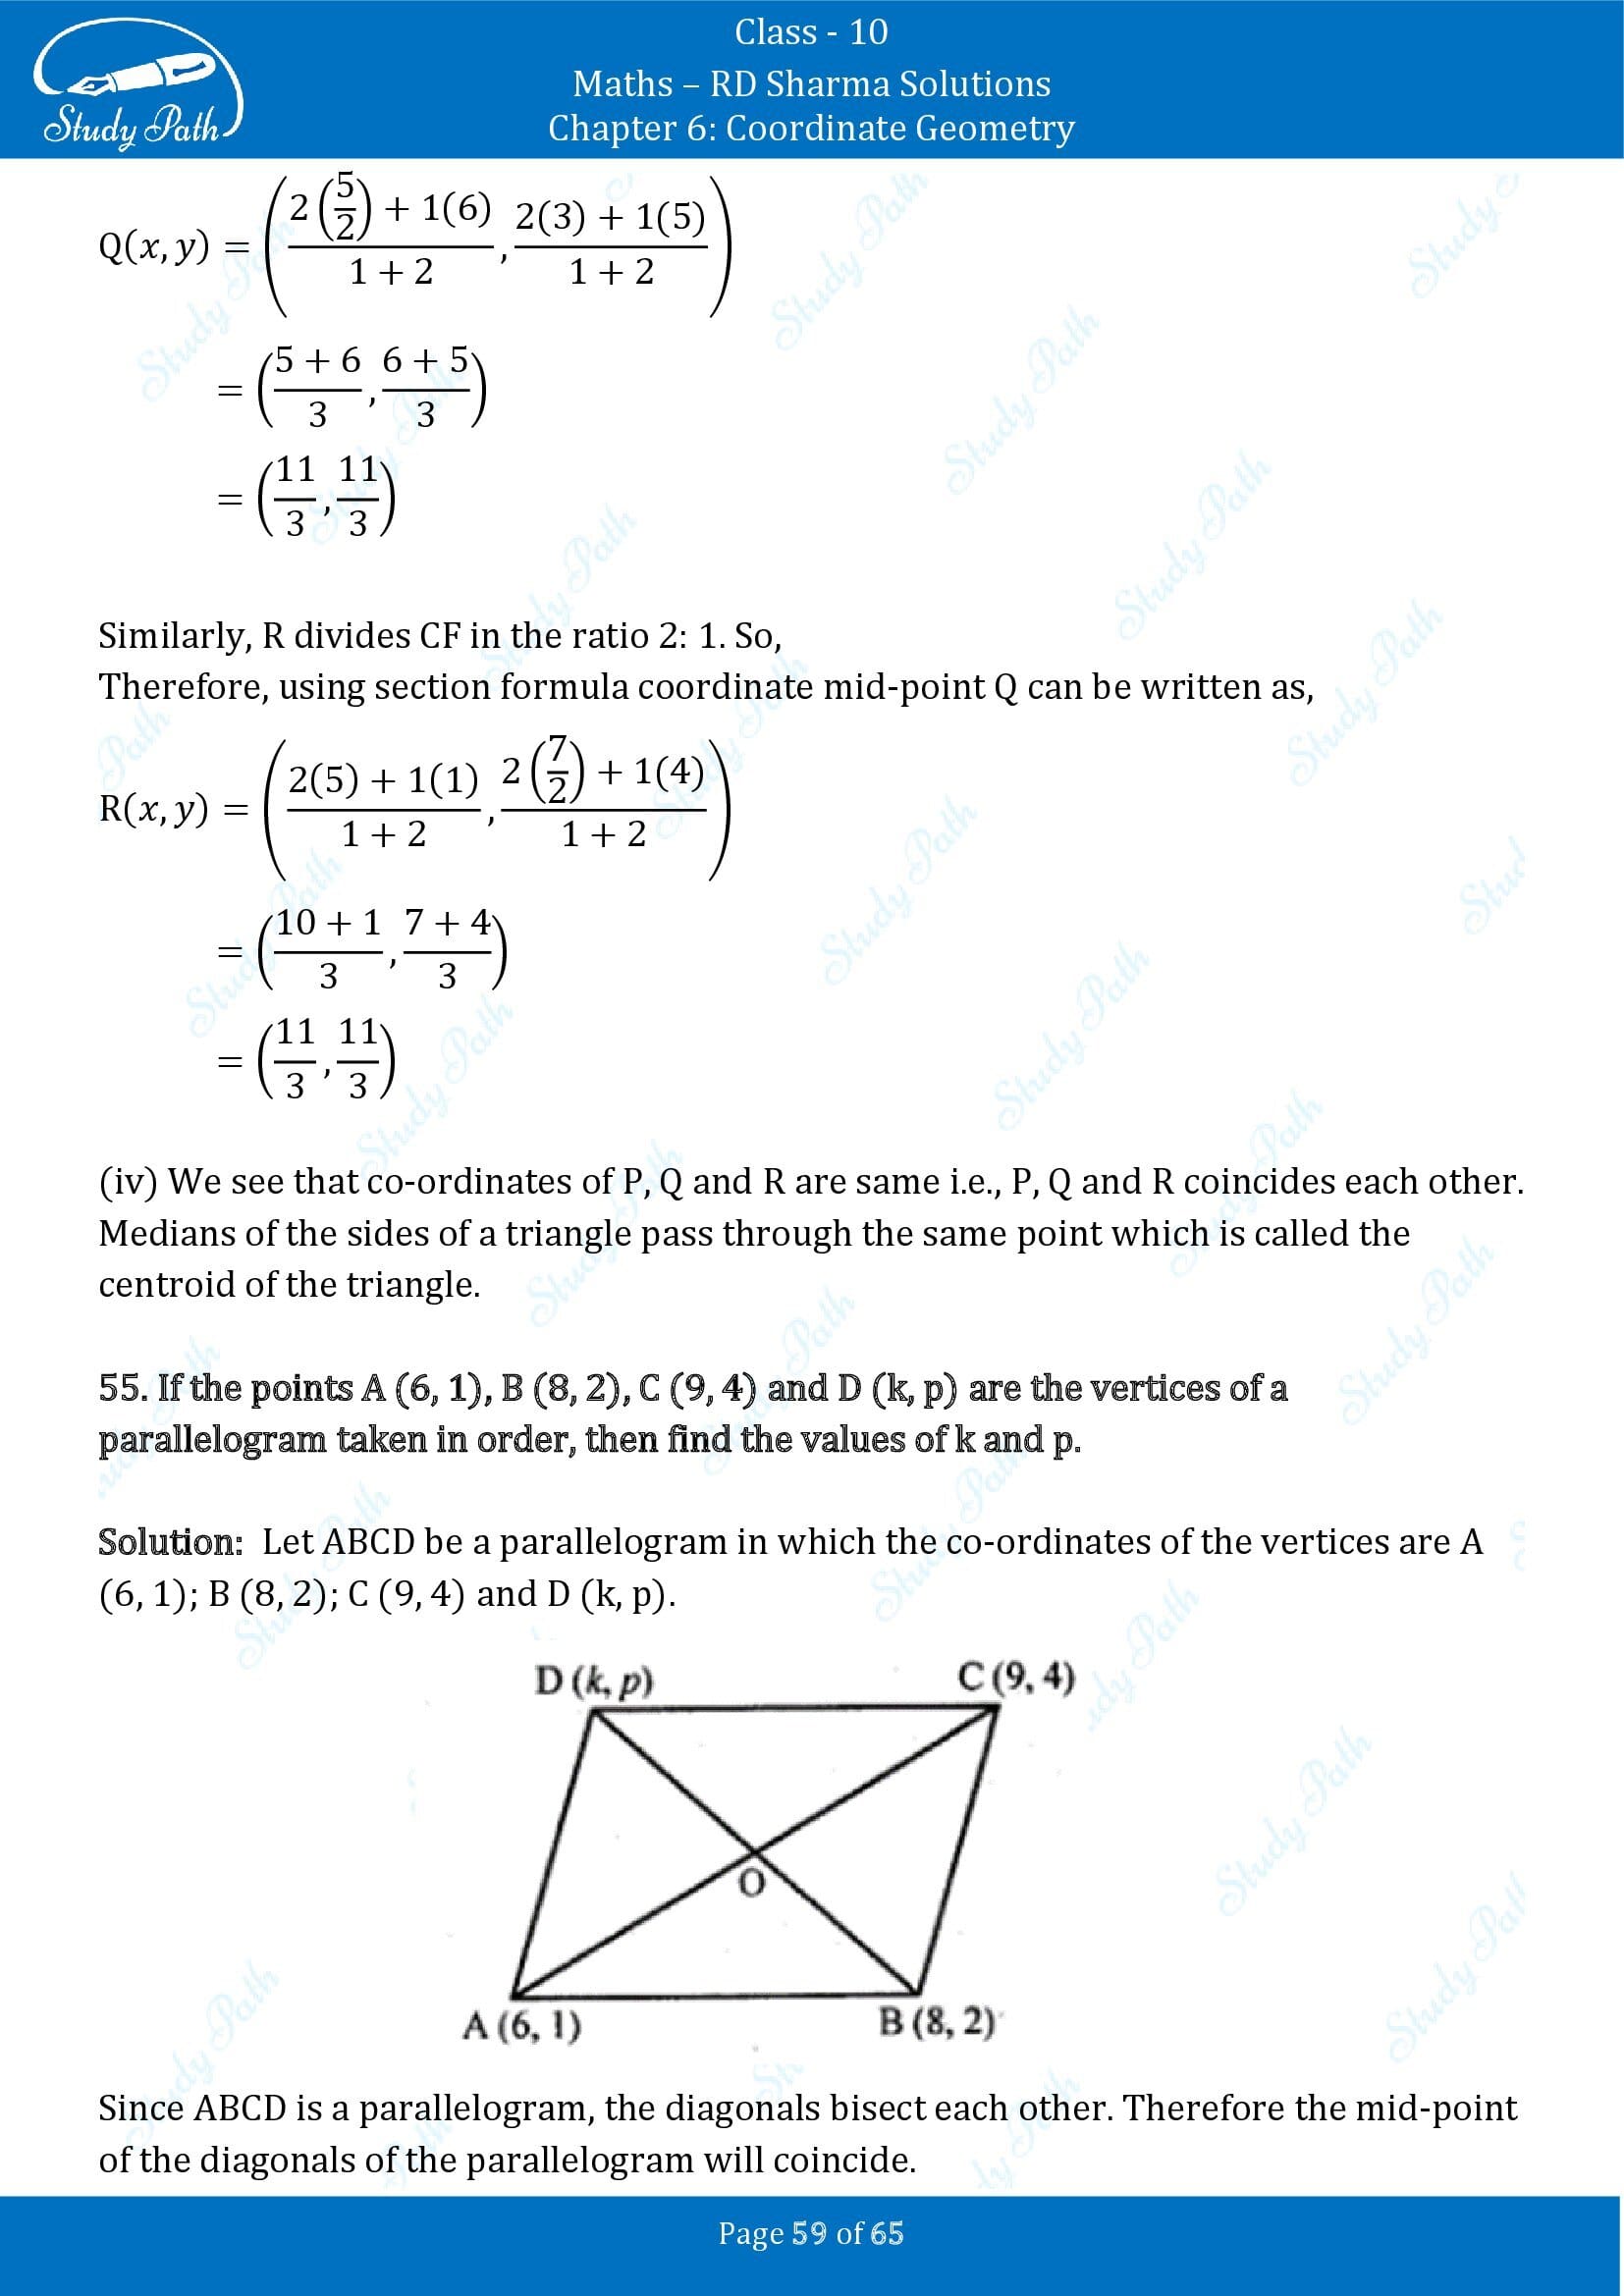 RD Sharma Solutions Class 10 Chapter 6 Coordinate Geometry Exercise 6.3 00059